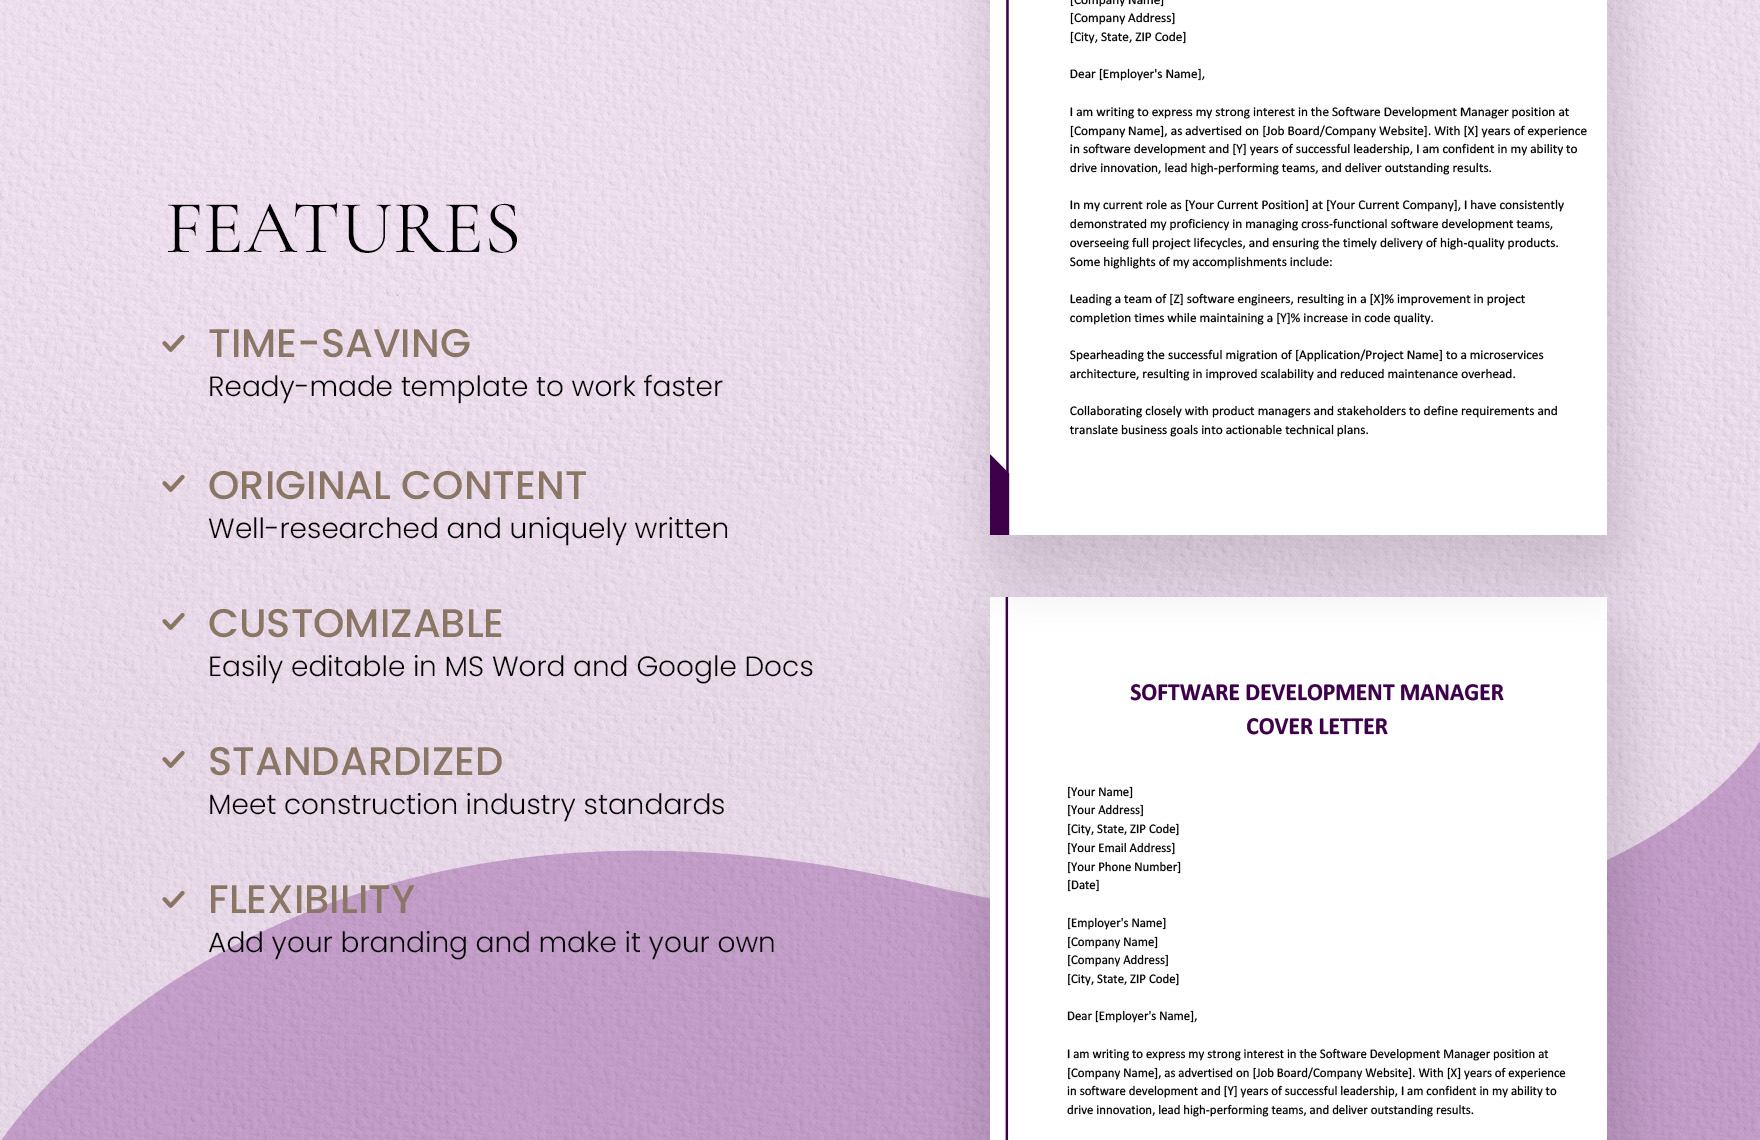 Software Development Manager Cover Letter